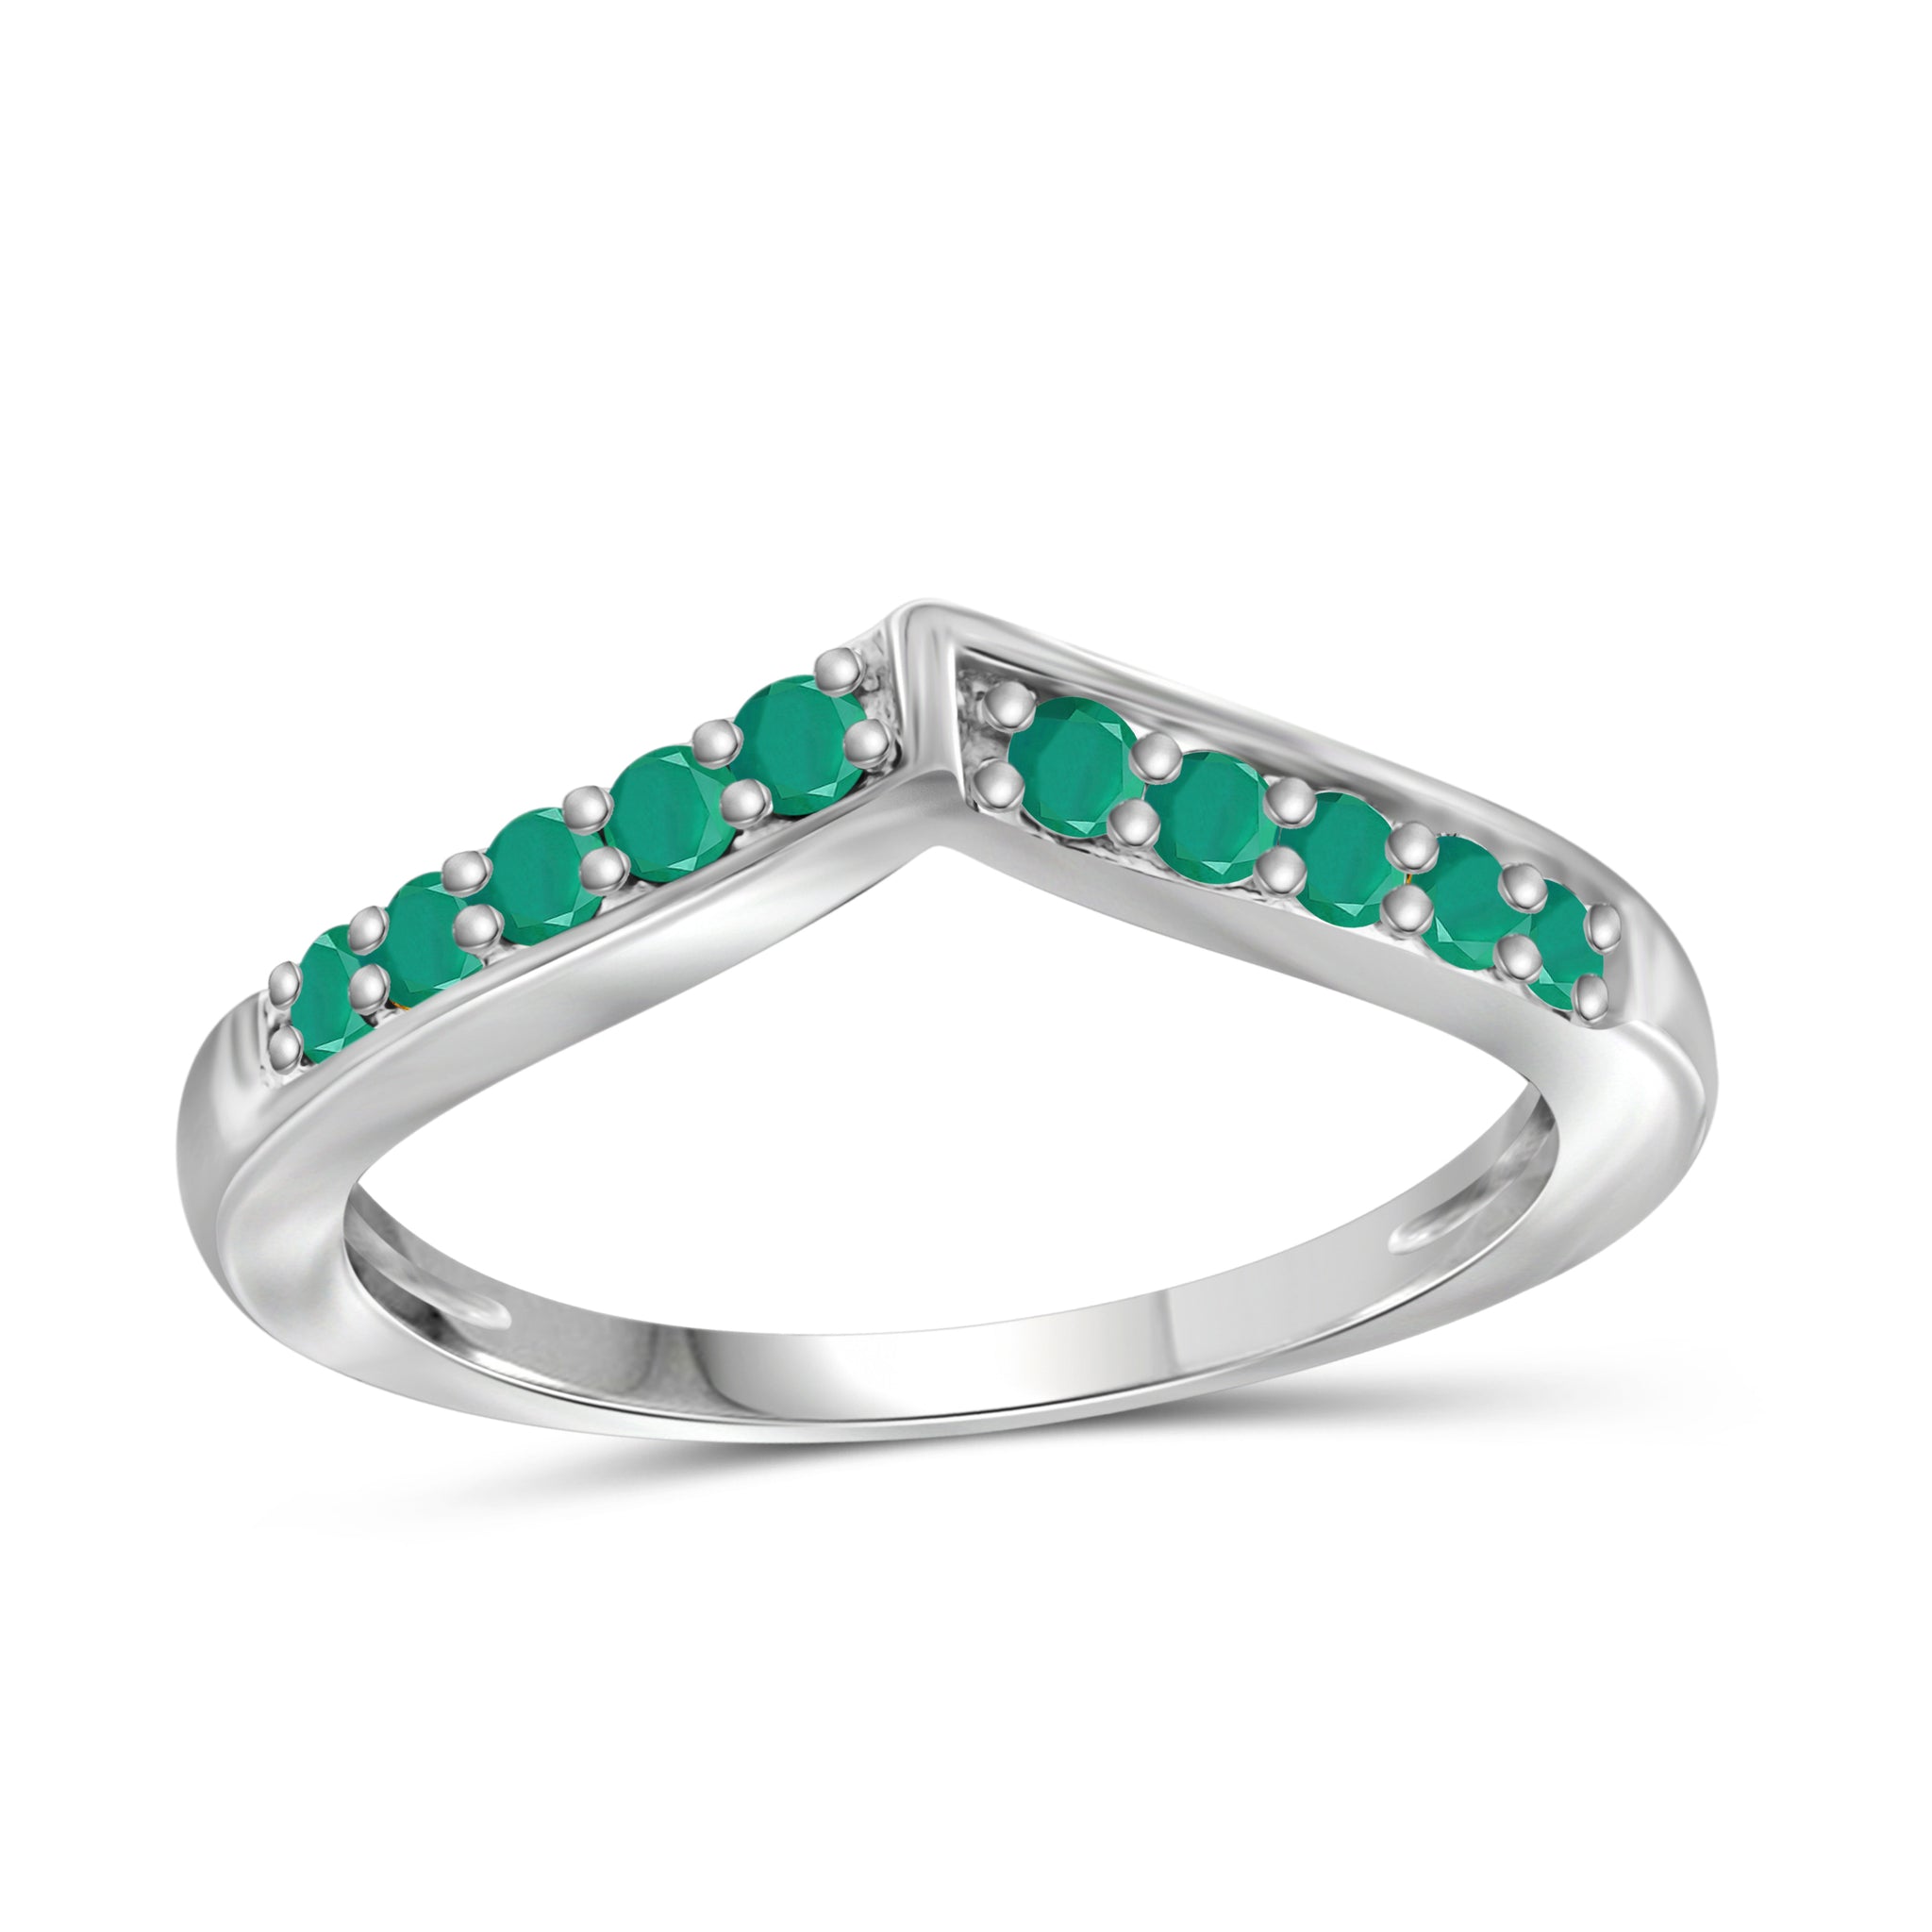 JewelonFire 0.60 Carat T.G.W. Emerald Sterling Silver Ring - Assorted Colors